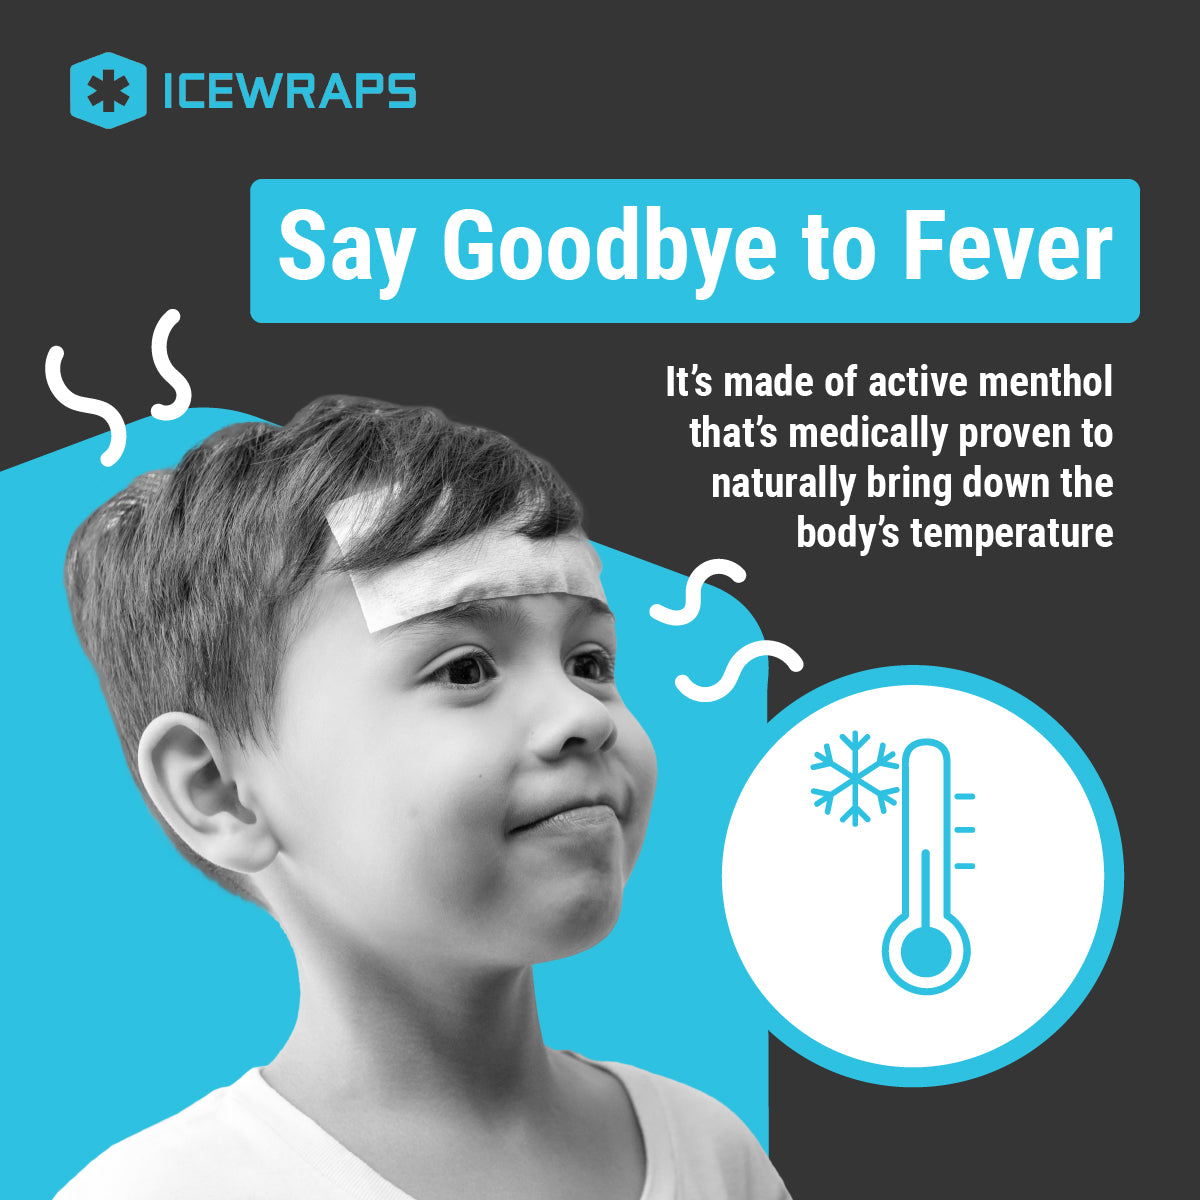 When fever hits, Cool Pads help bring your little one's temp back down. No  need to refrigerate them. Just open, cut to any size if needed…